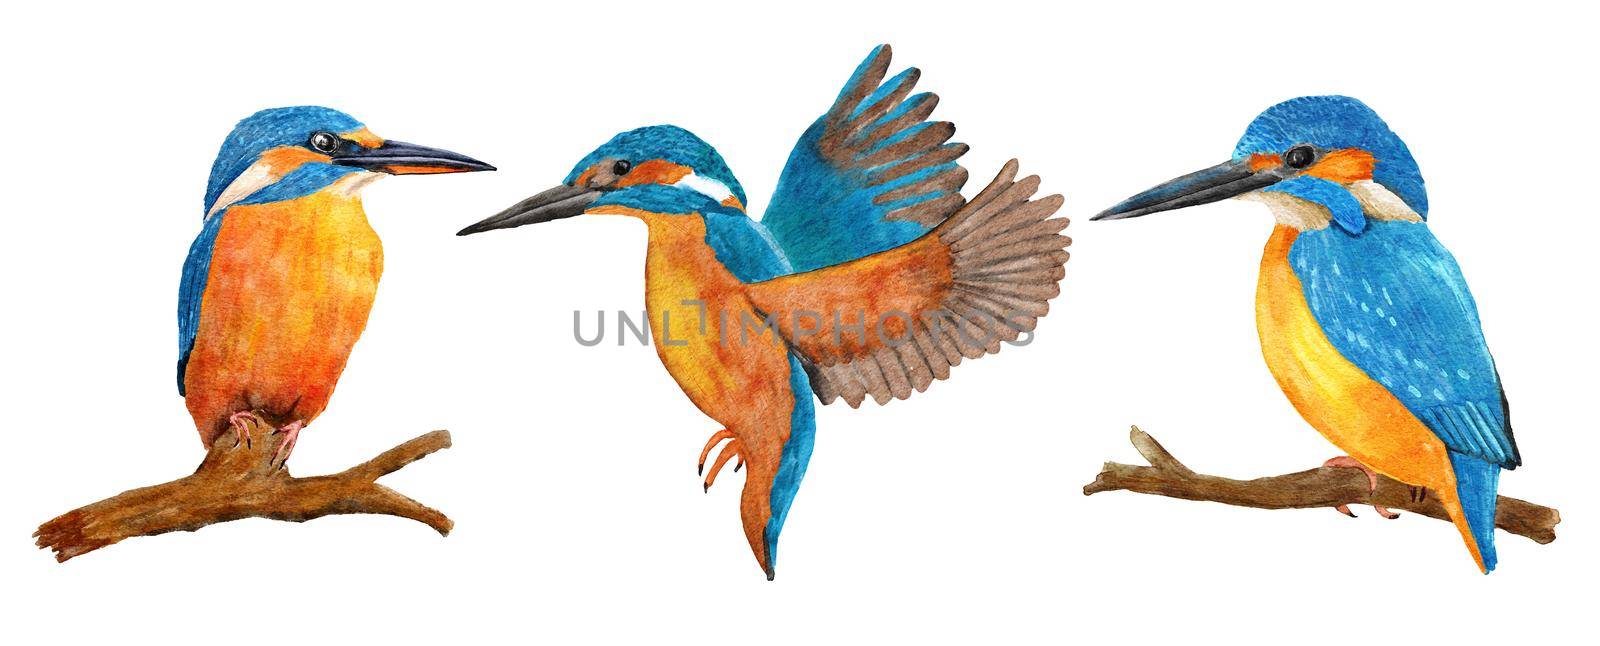 Hand drawn watercolor illustration of wild kingfisher birds, blue azure orange feathers, on the branch and flying. Nature natural wildlife in river forest woodland, ecology concept. by Lagmar